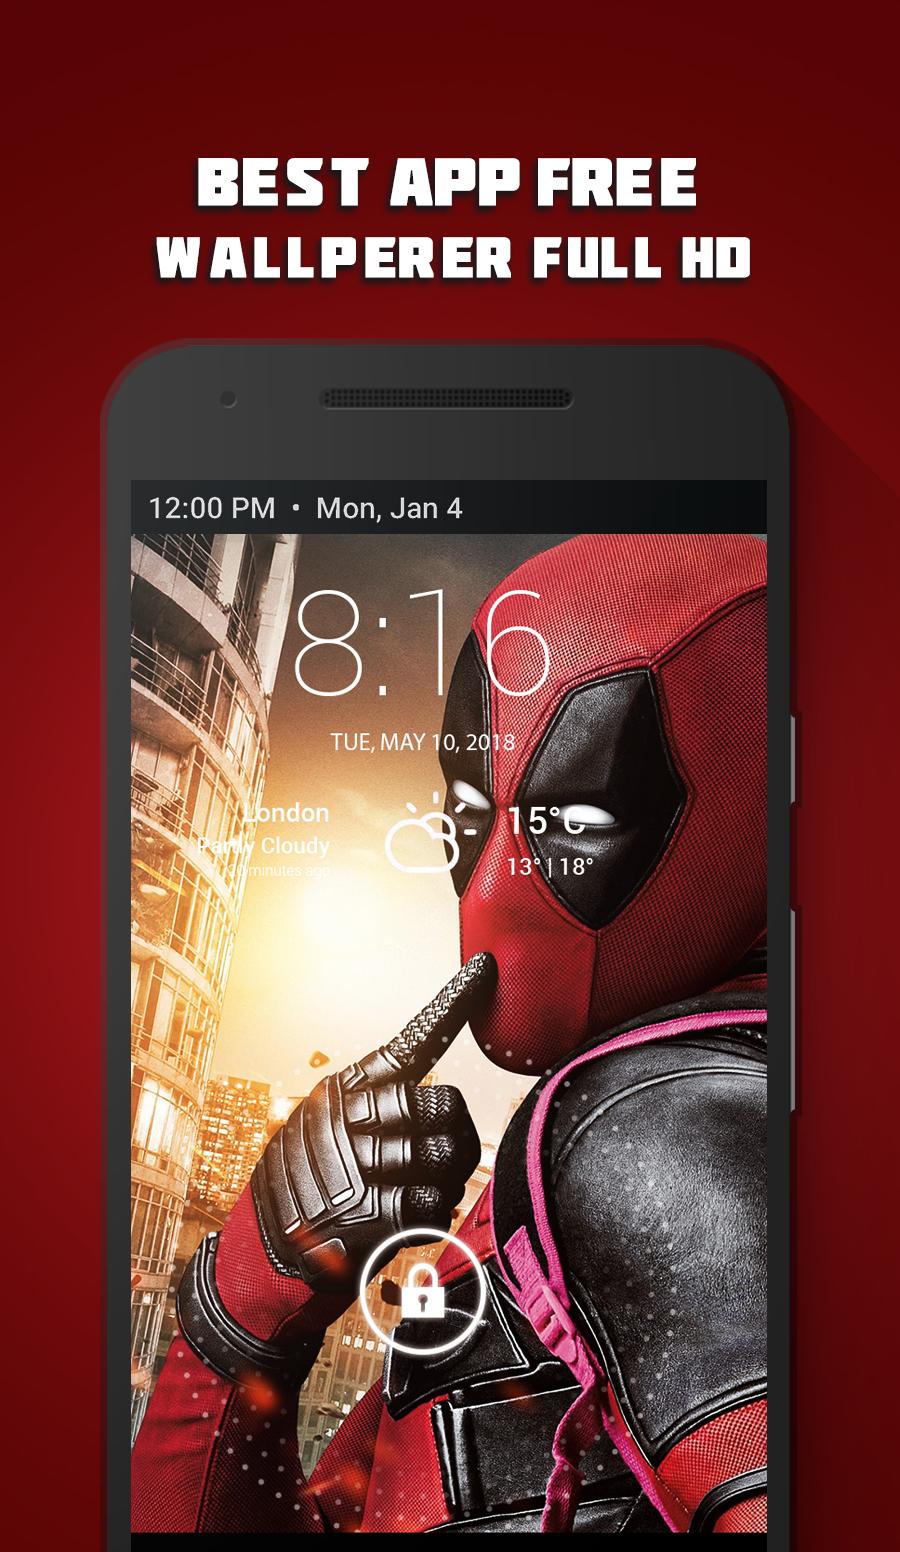 Deadpool 2 Wallpaper Free Image For Android Apk Download